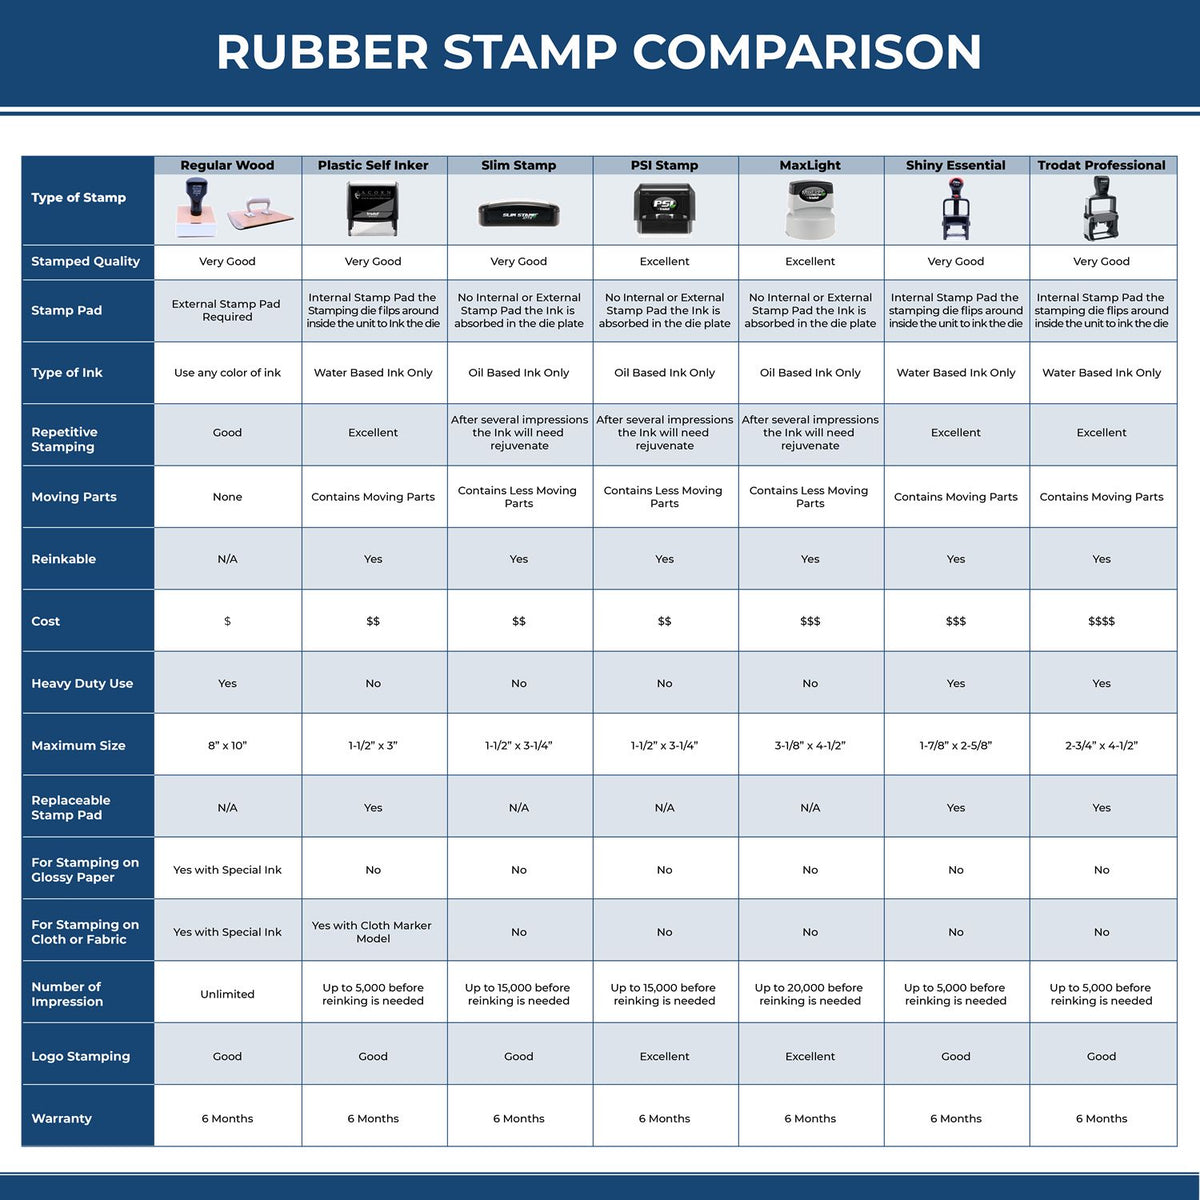 Large Due Date Rubber Stamp 4652R Rubber Stamp Comparison